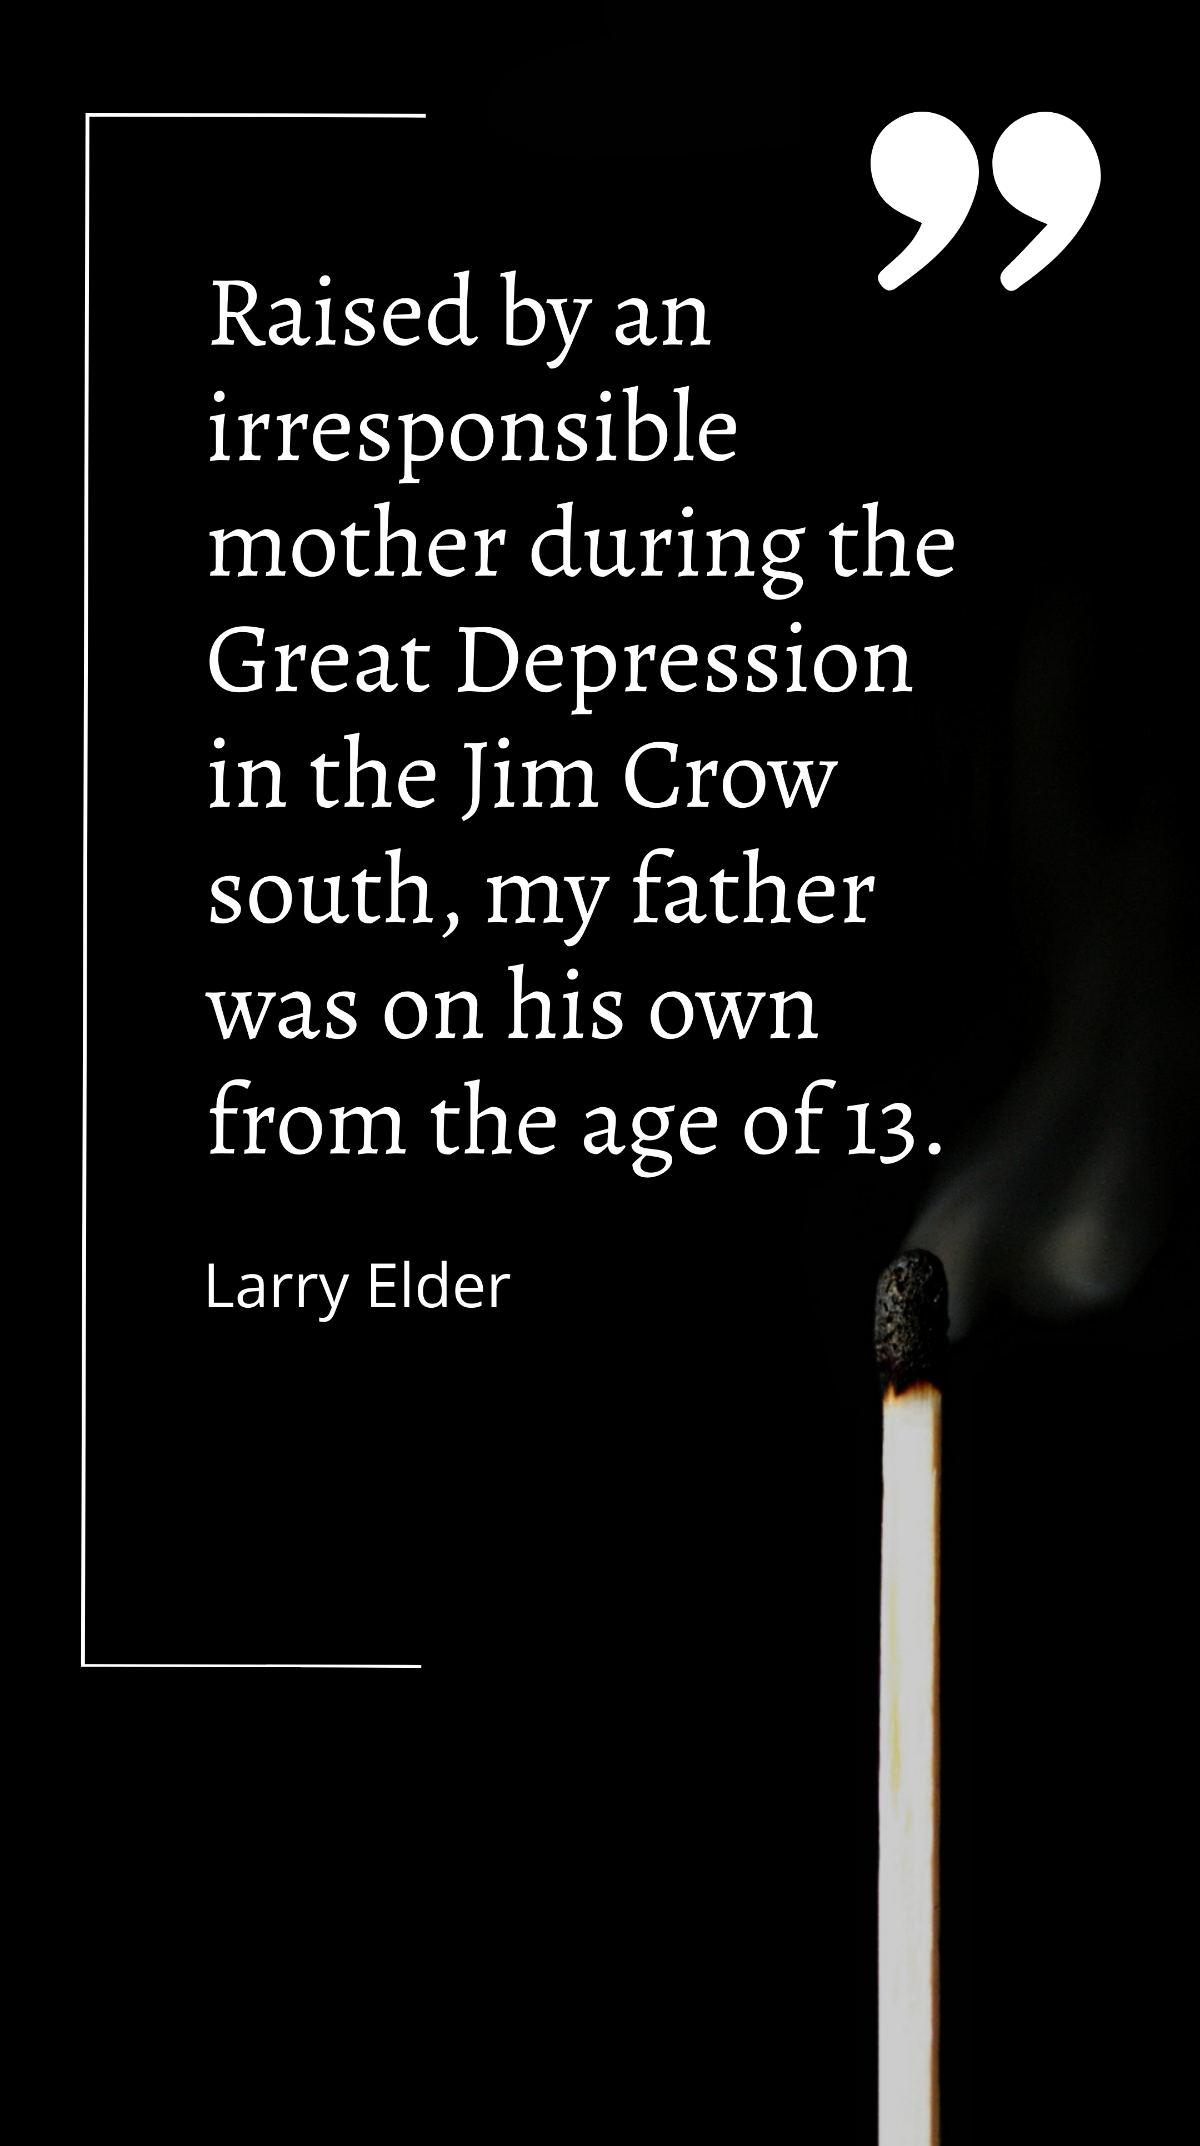 Larry Elder - Raised by an irresponsible mother during the Great Depression in the Jim Crow south, my father was on his own from the age of 13. Template